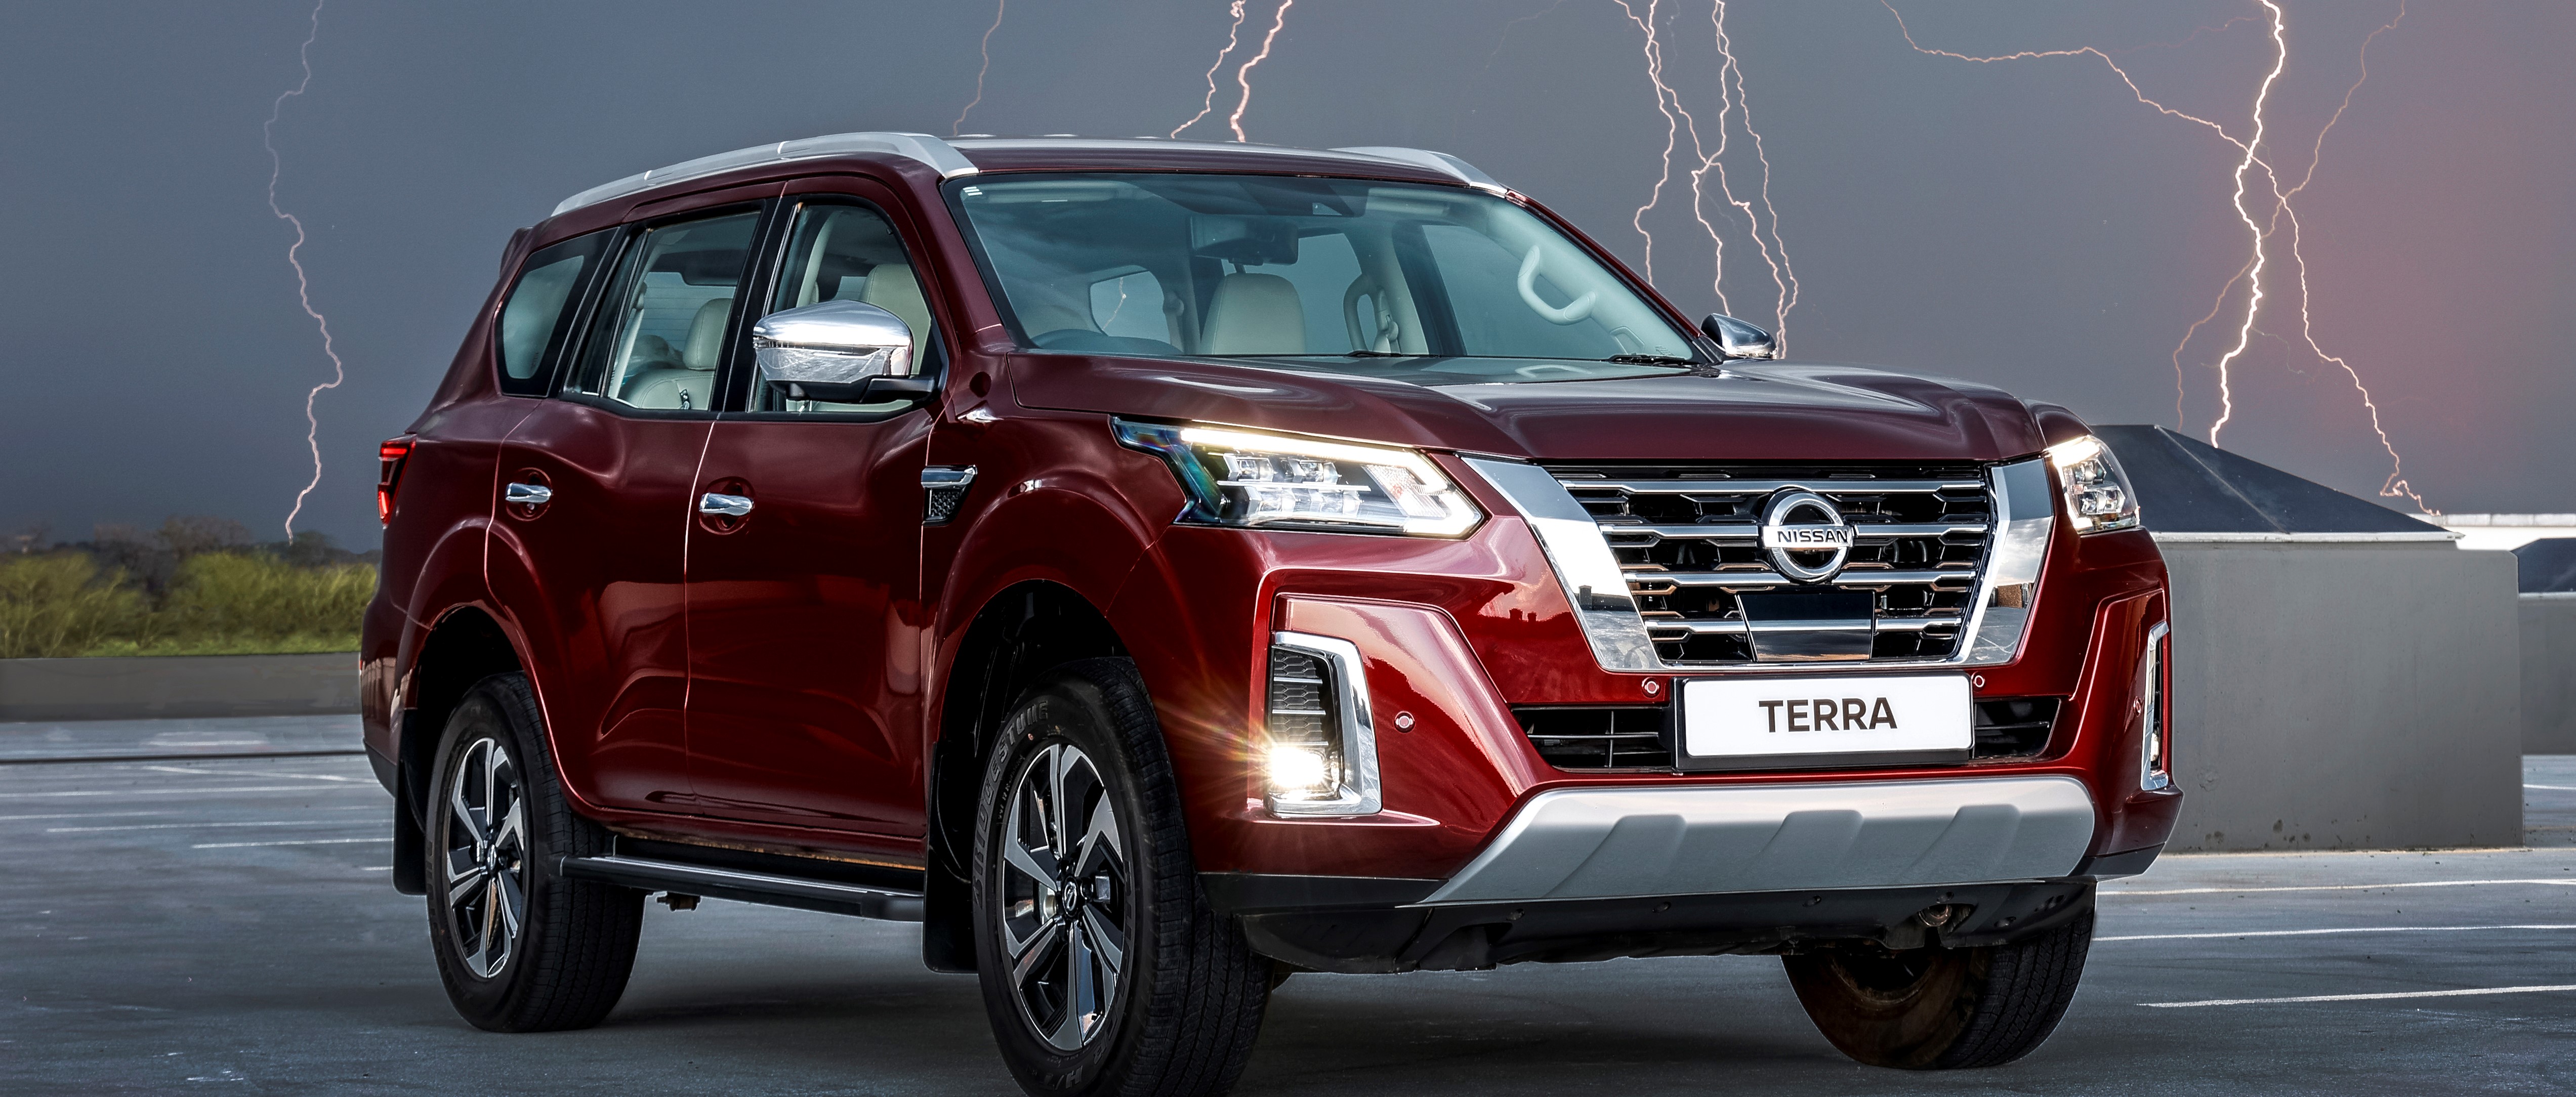 All-New Nissan Terra expands SUV line-up in Tanzania